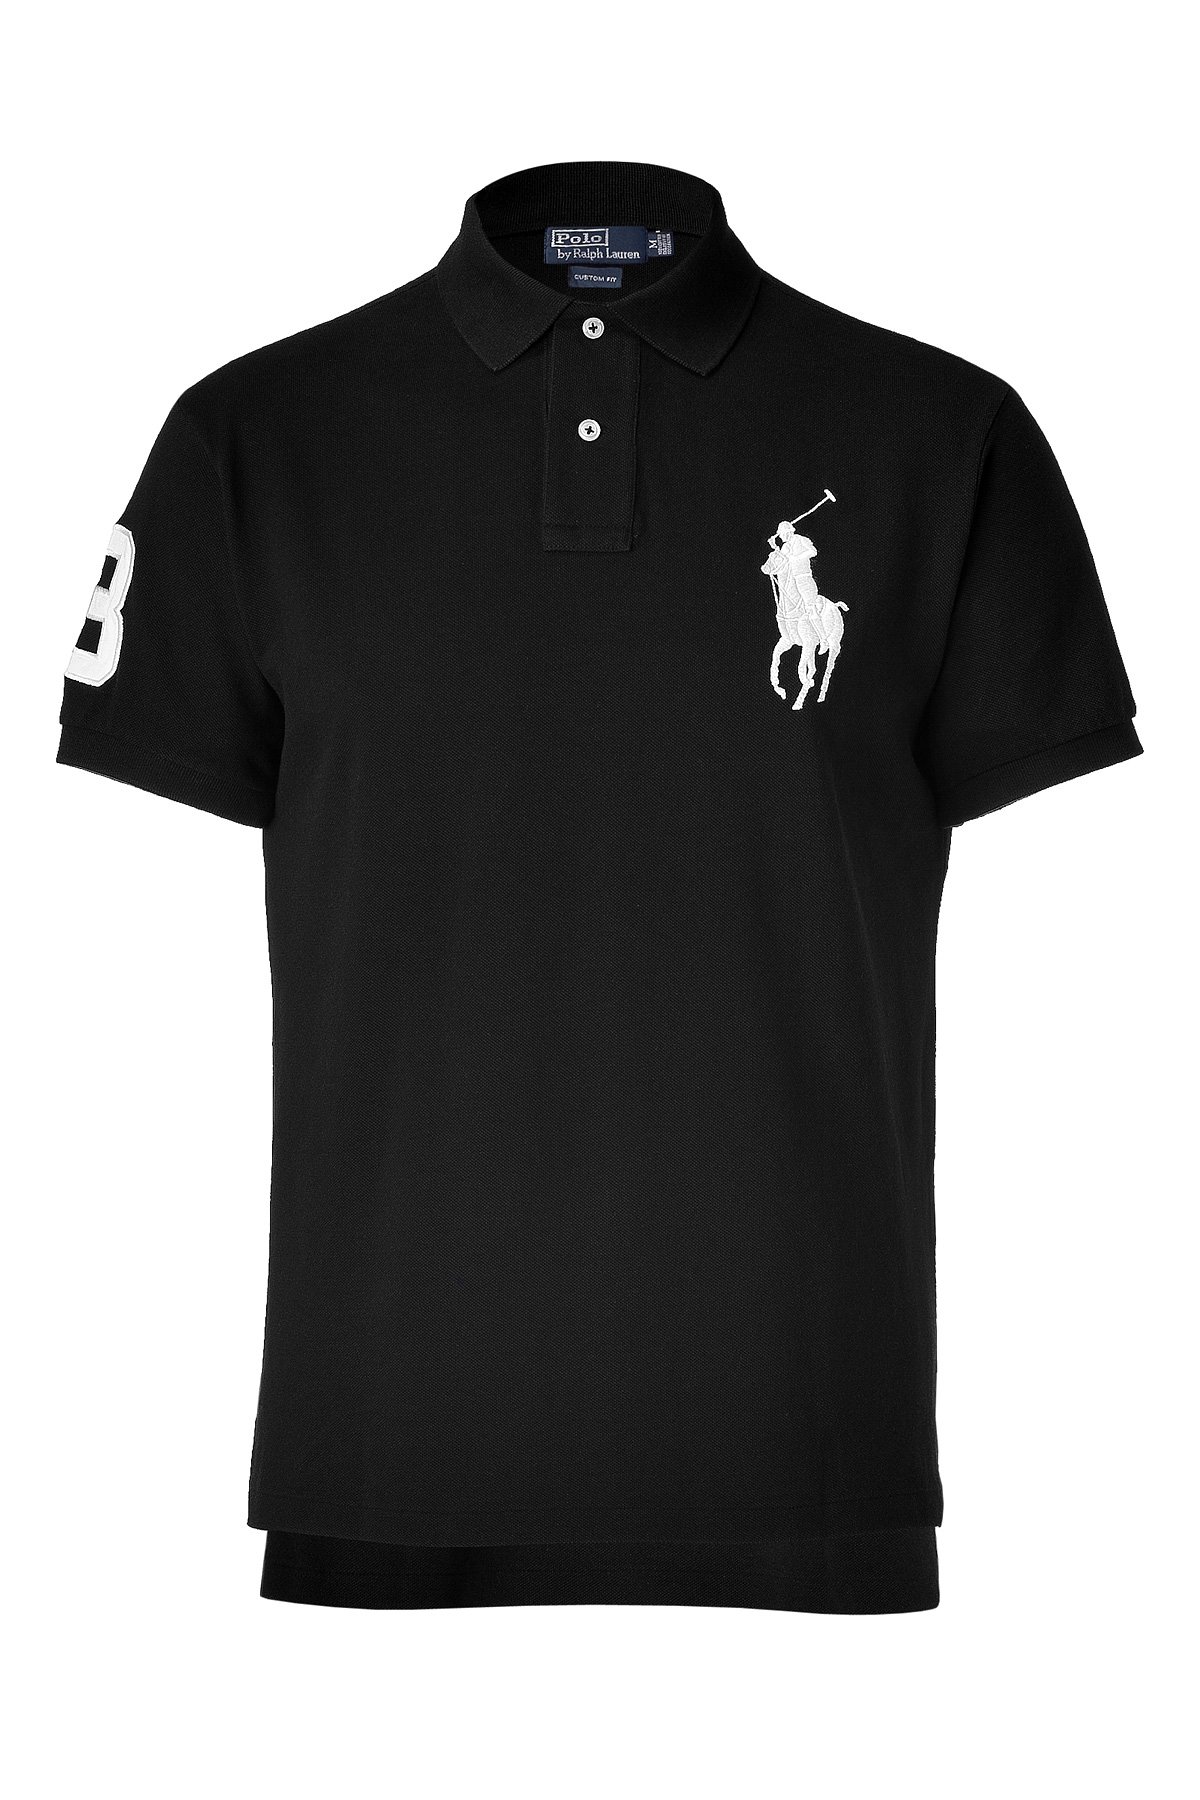 Lyst - Polo Ralph Lauren Black Solid Weathered Mesh Polo Shirt in Black ...